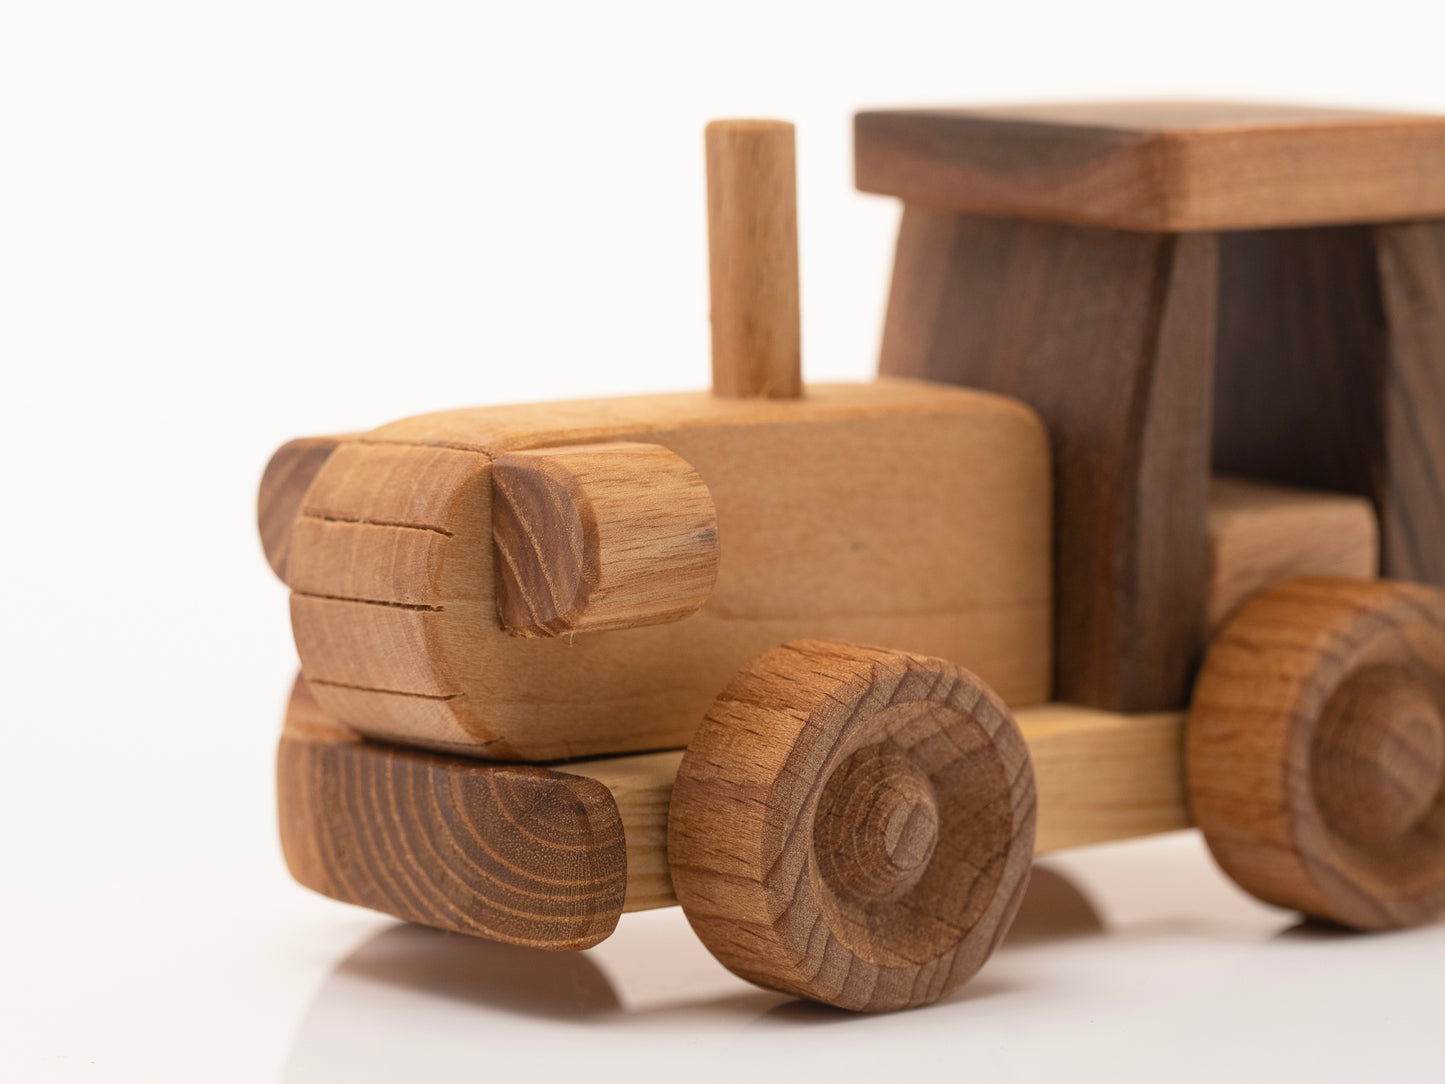 Tractor Wooden Toy